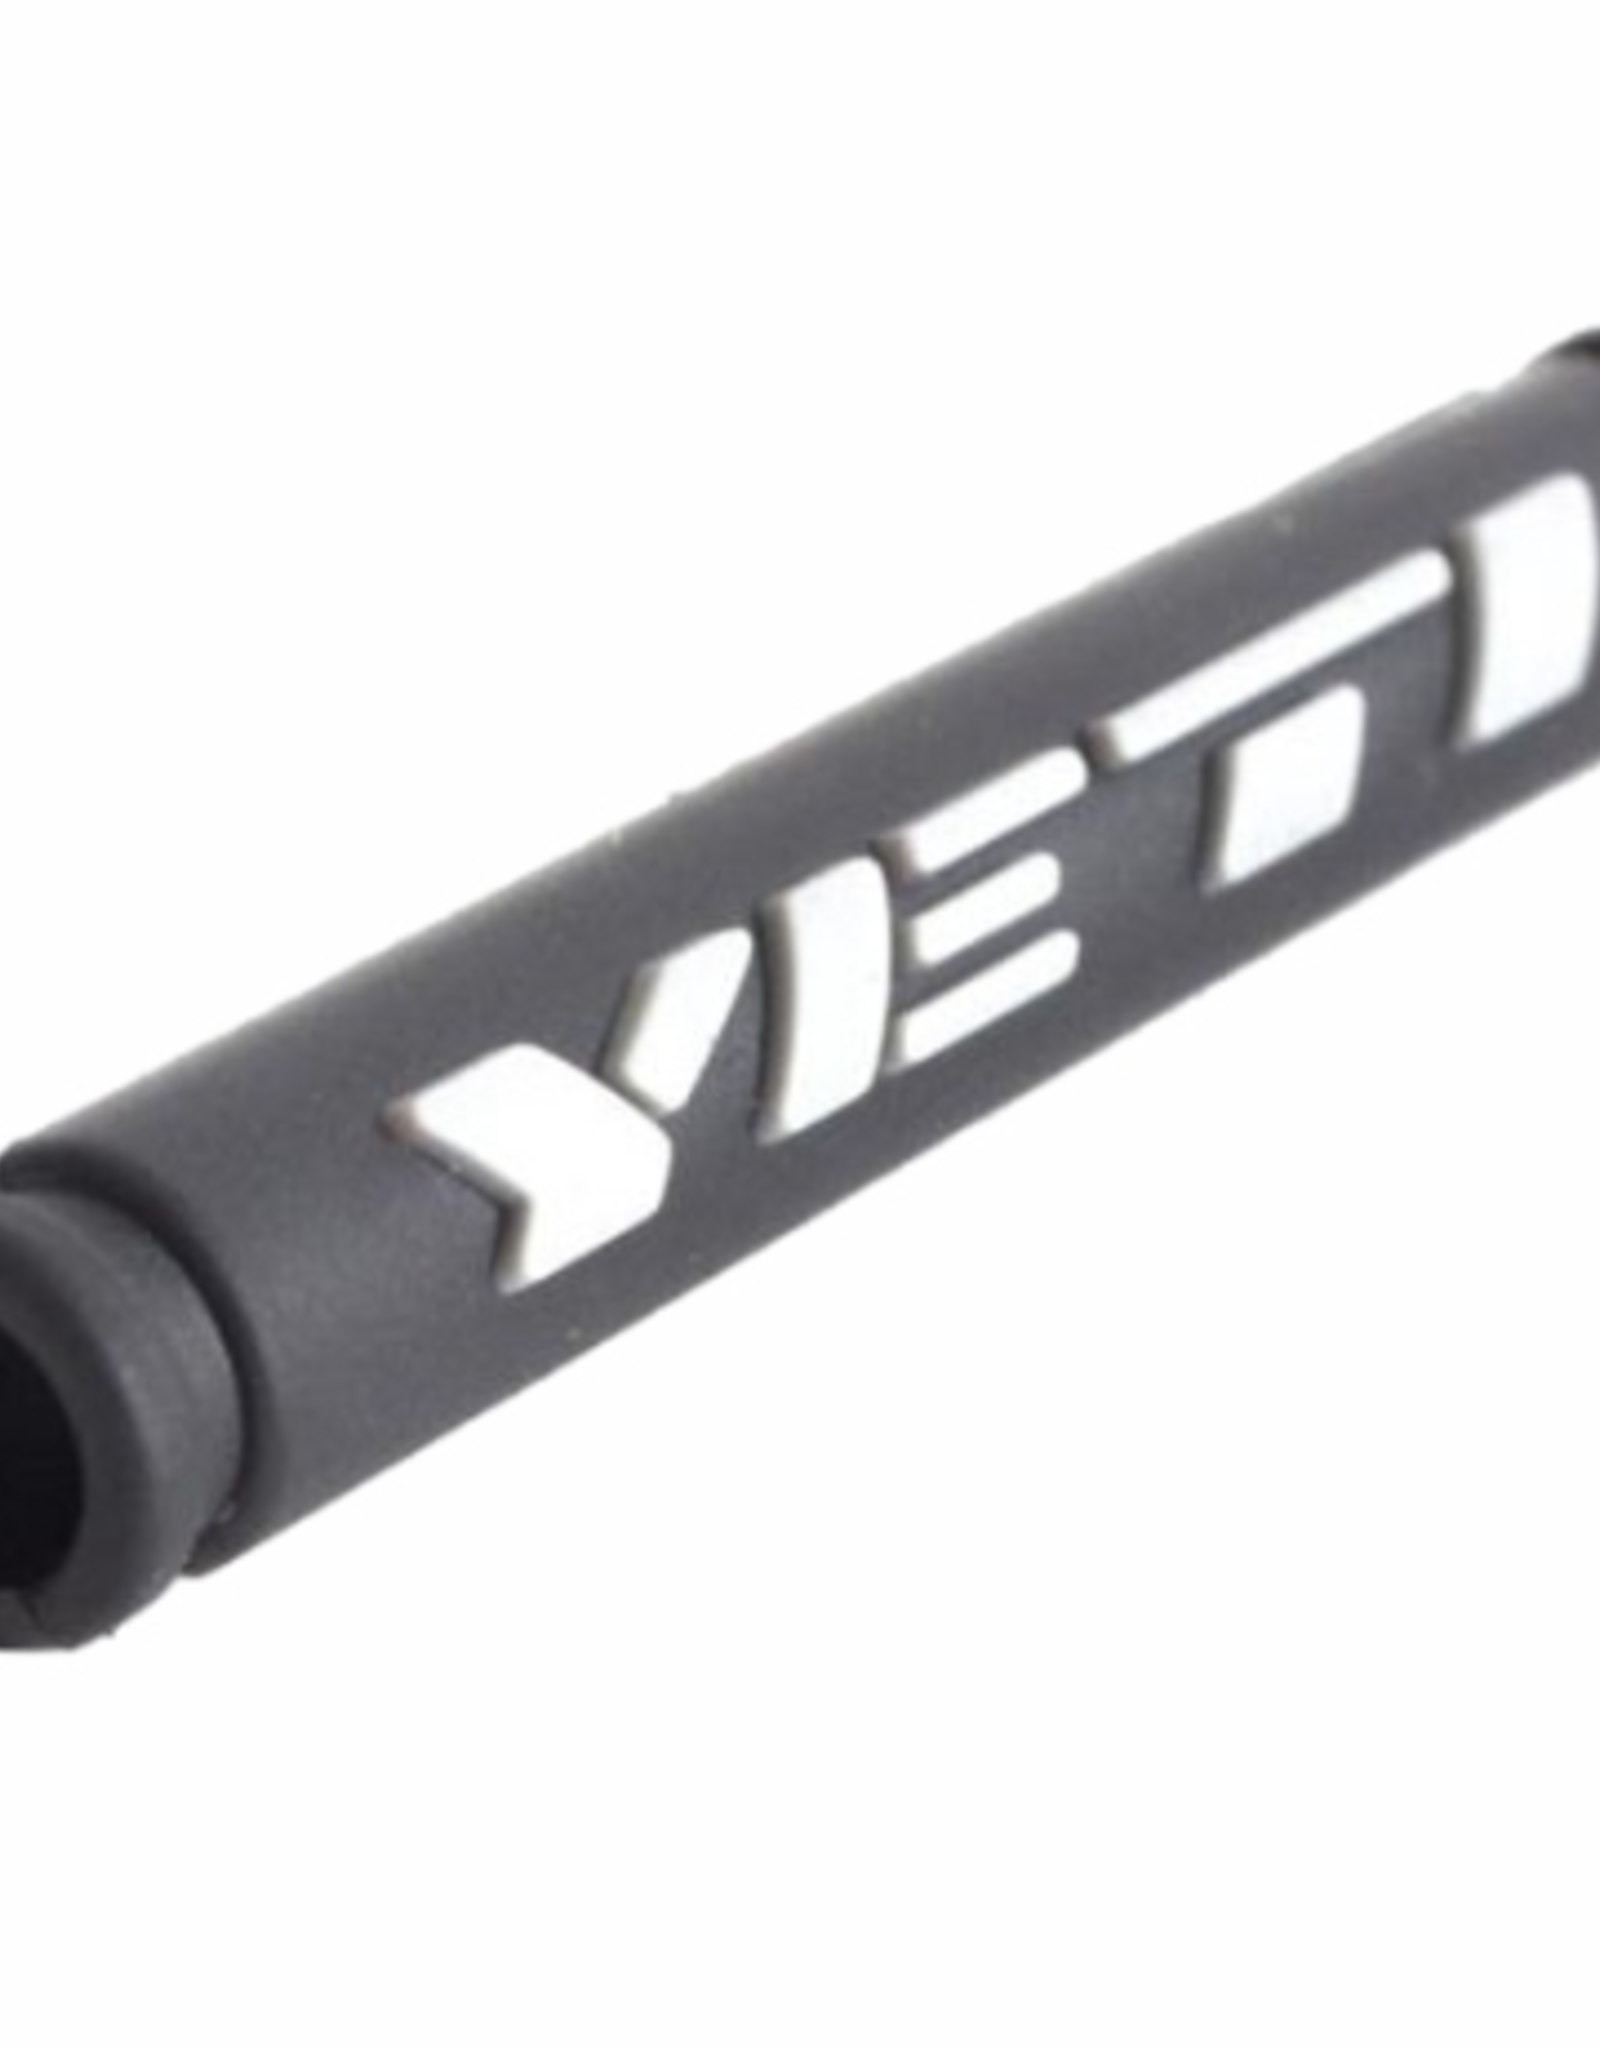 Yeti Cycles CABLE PROTECT BLACK (SET)